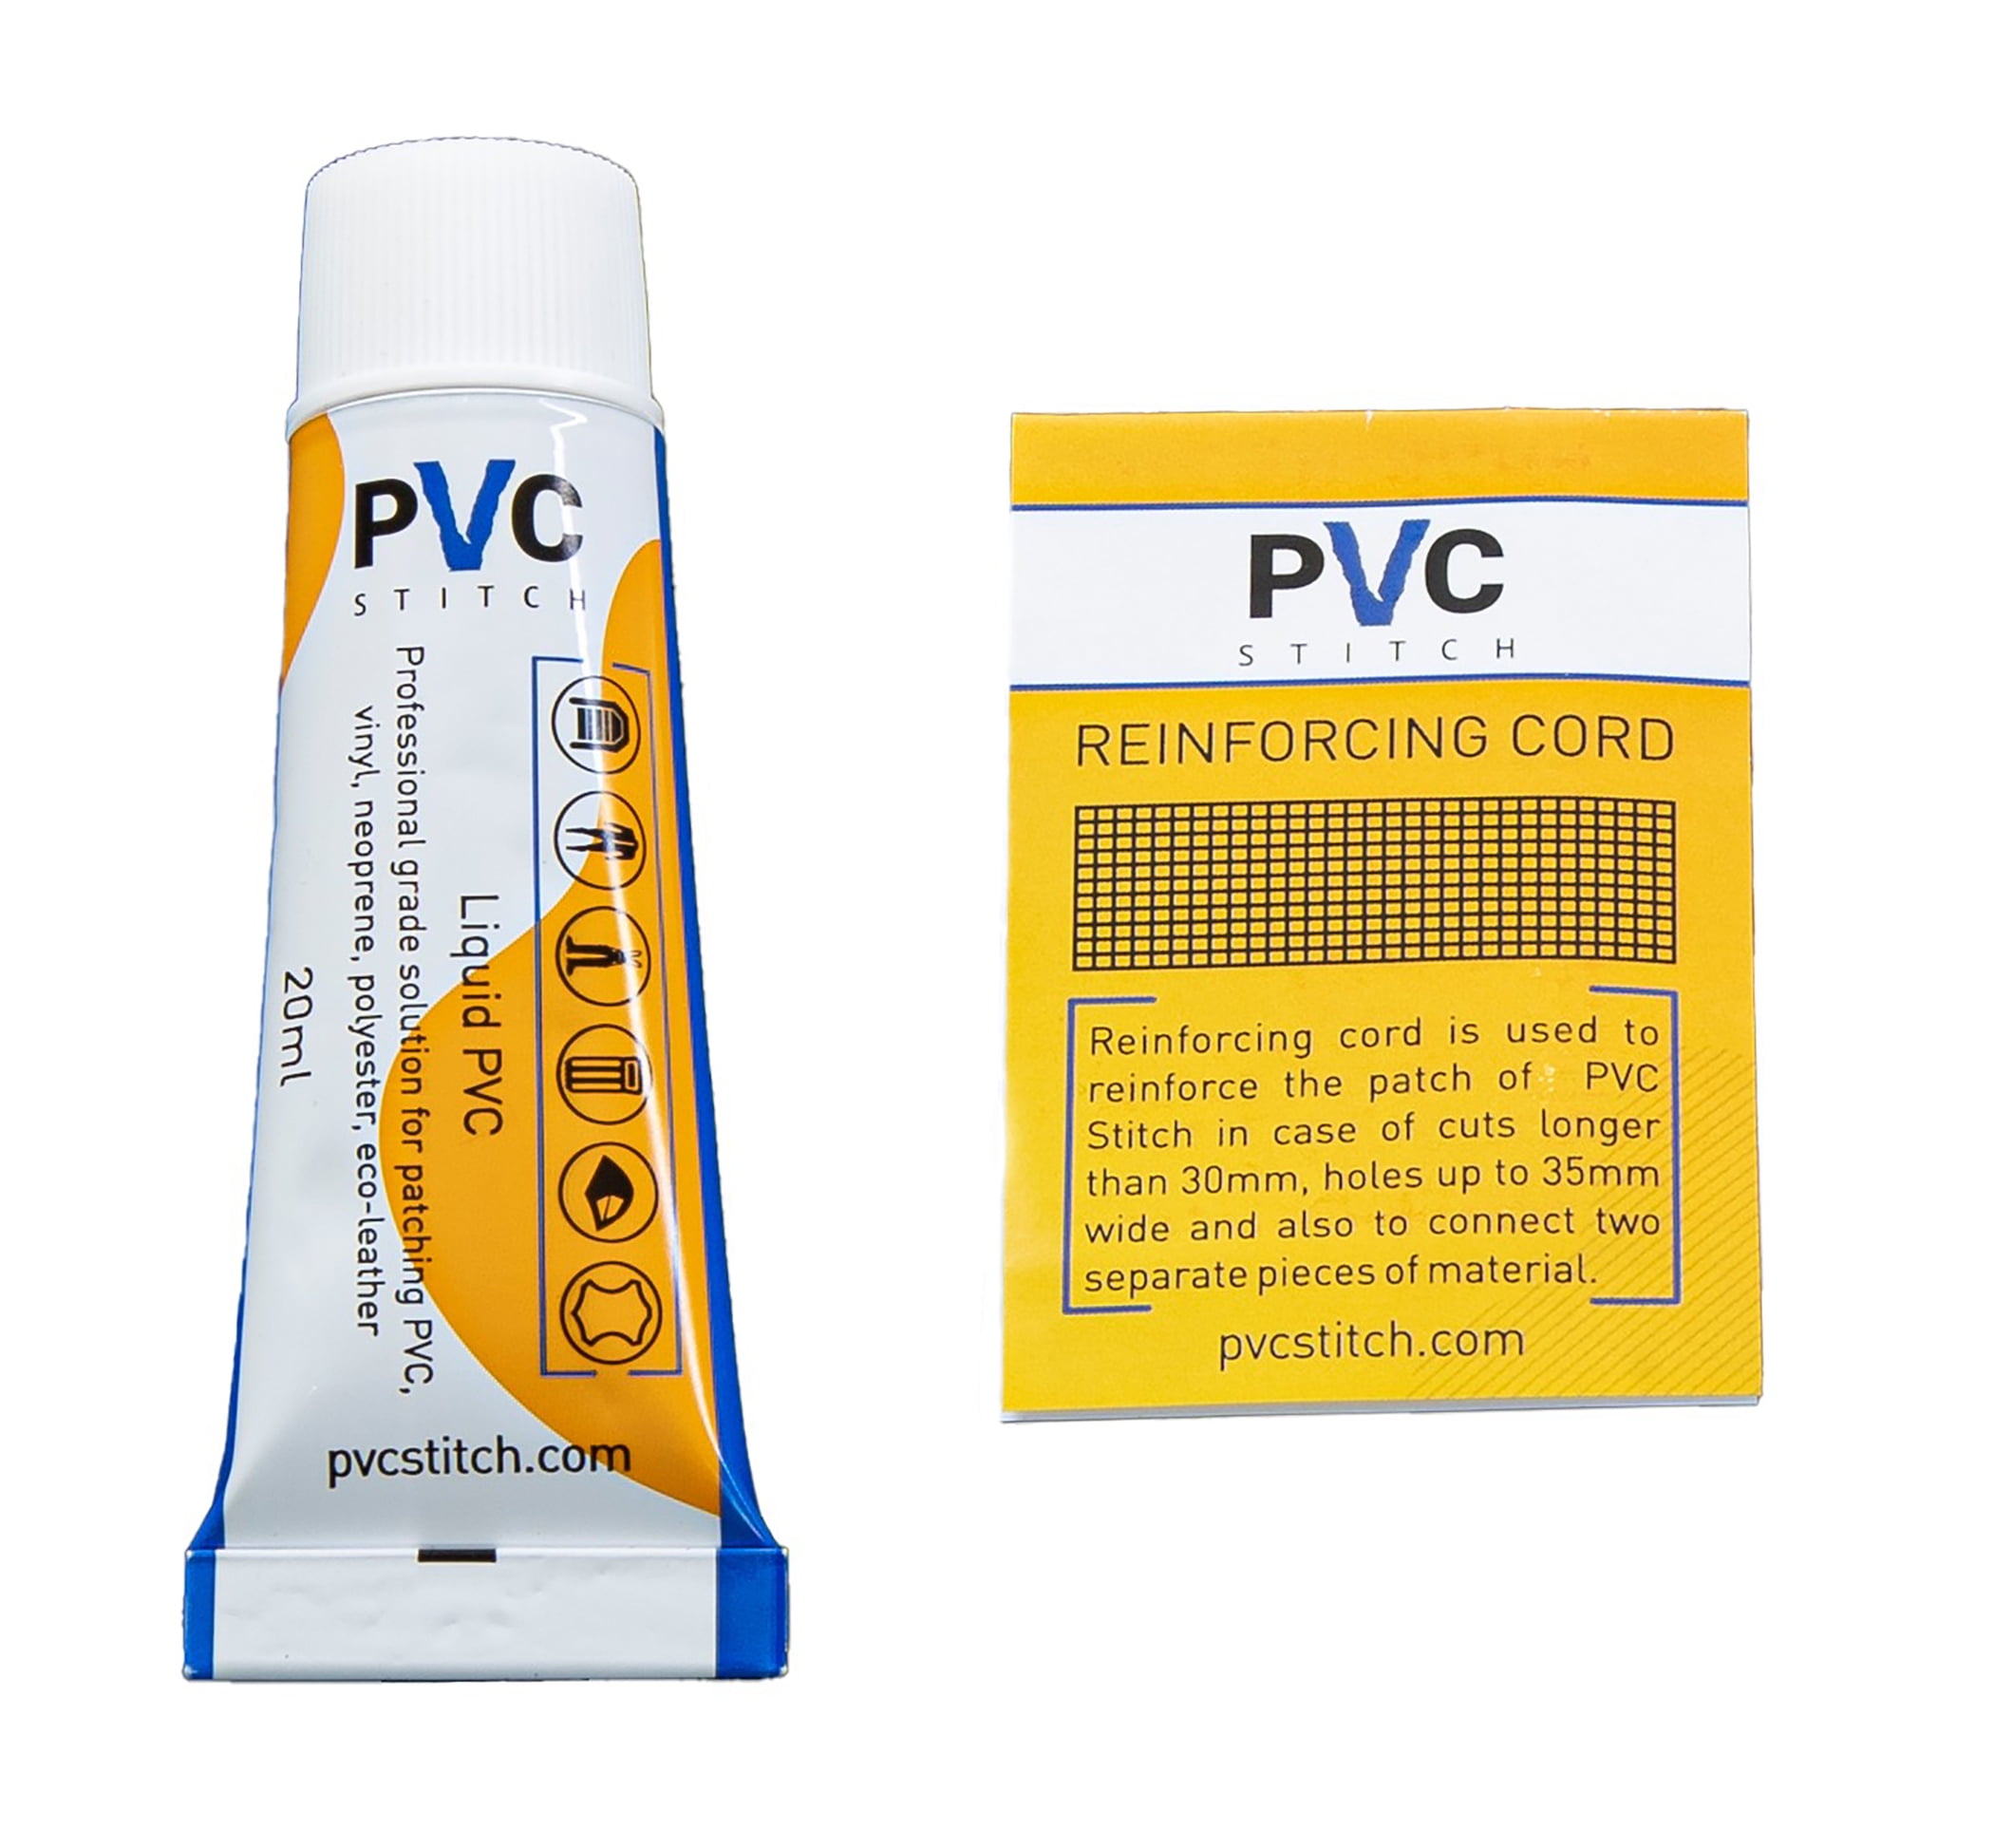 PVC Stitch Liquid Waterproof Repair Patch for Air Mattresses, Waterbeds,  Above-Ground Pools, Bouncy Houses, Hot Tubs, Air Tracks, Works on Blow up  PVC